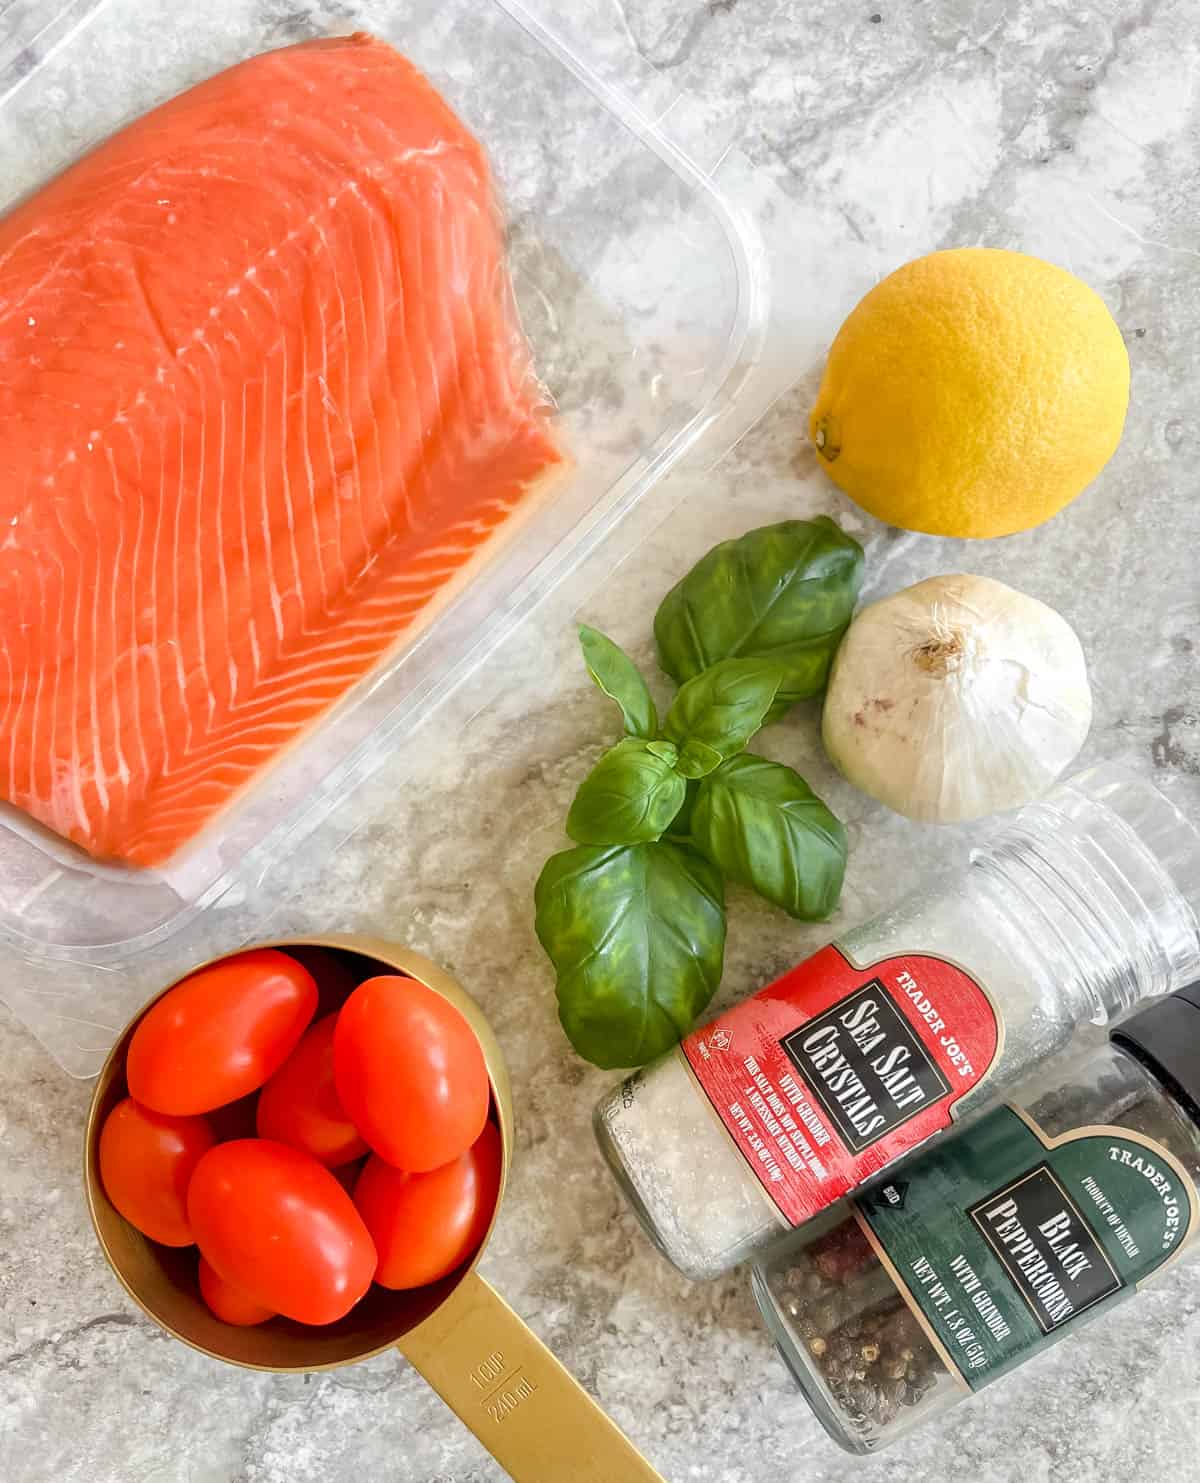 Ingredients needed to make Oven Baked Basil Tomato Salmon in Foil.